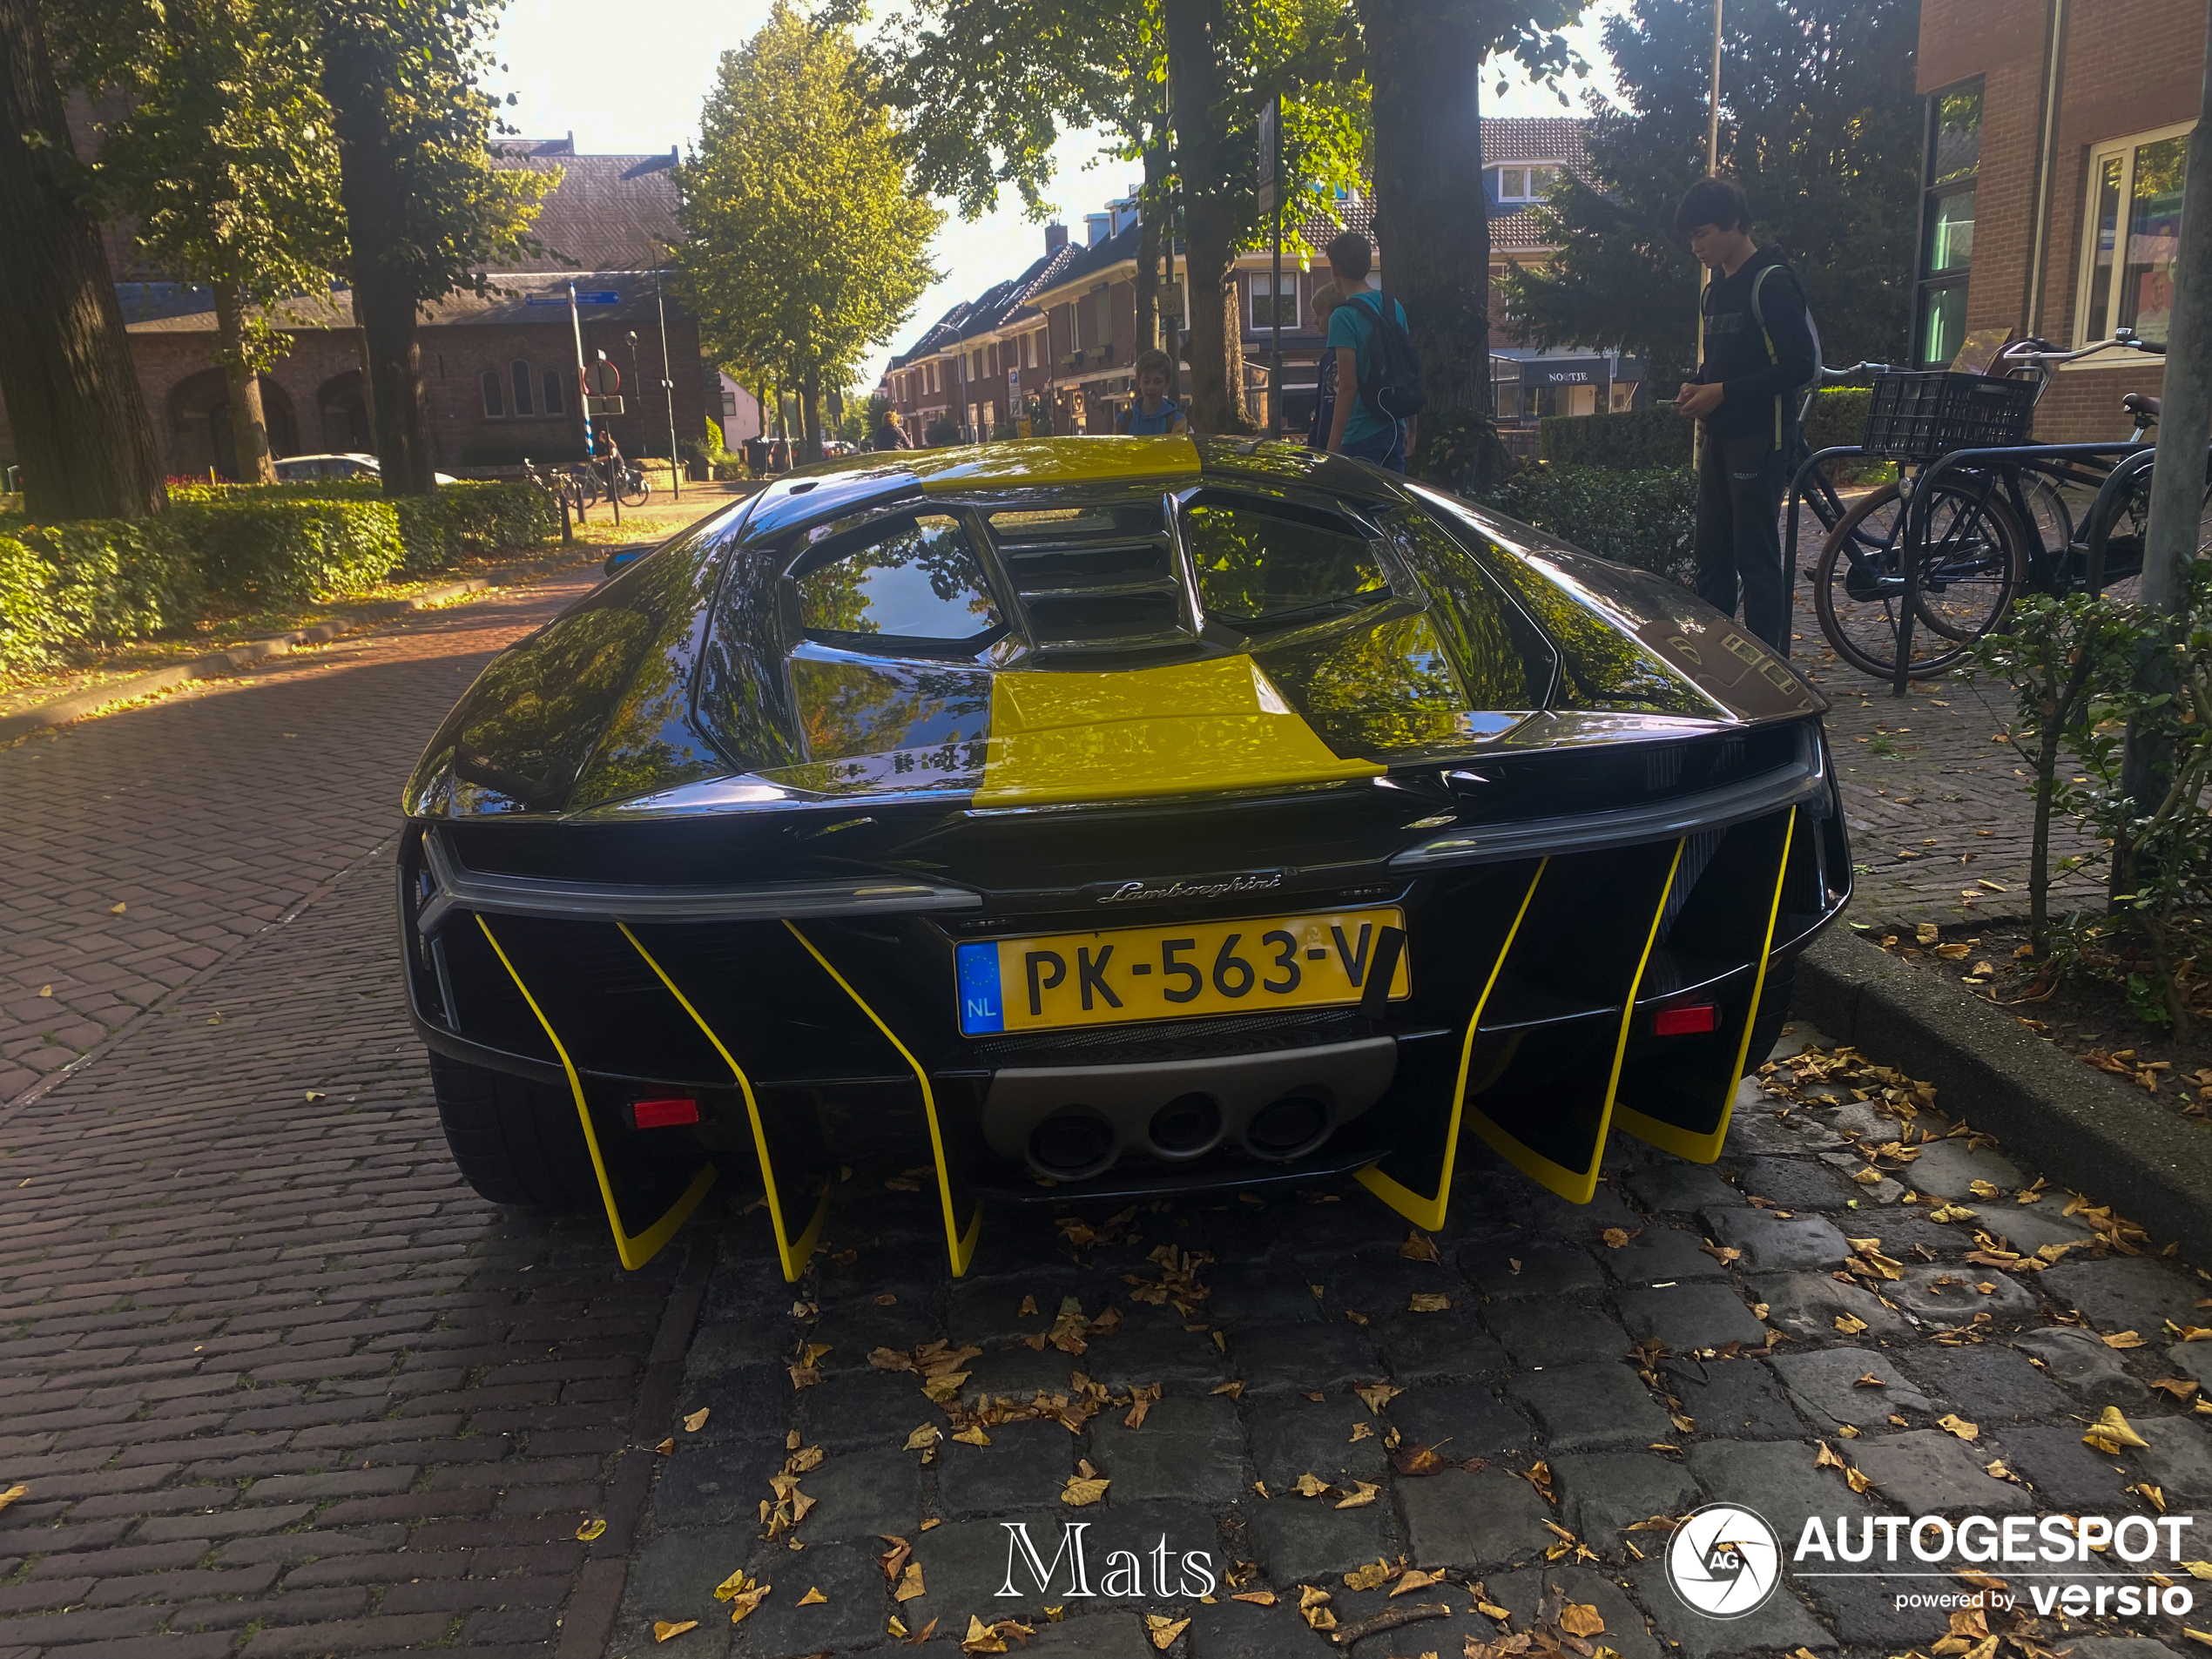 Once again, this Centenario makes an appearance in the Netherlands.